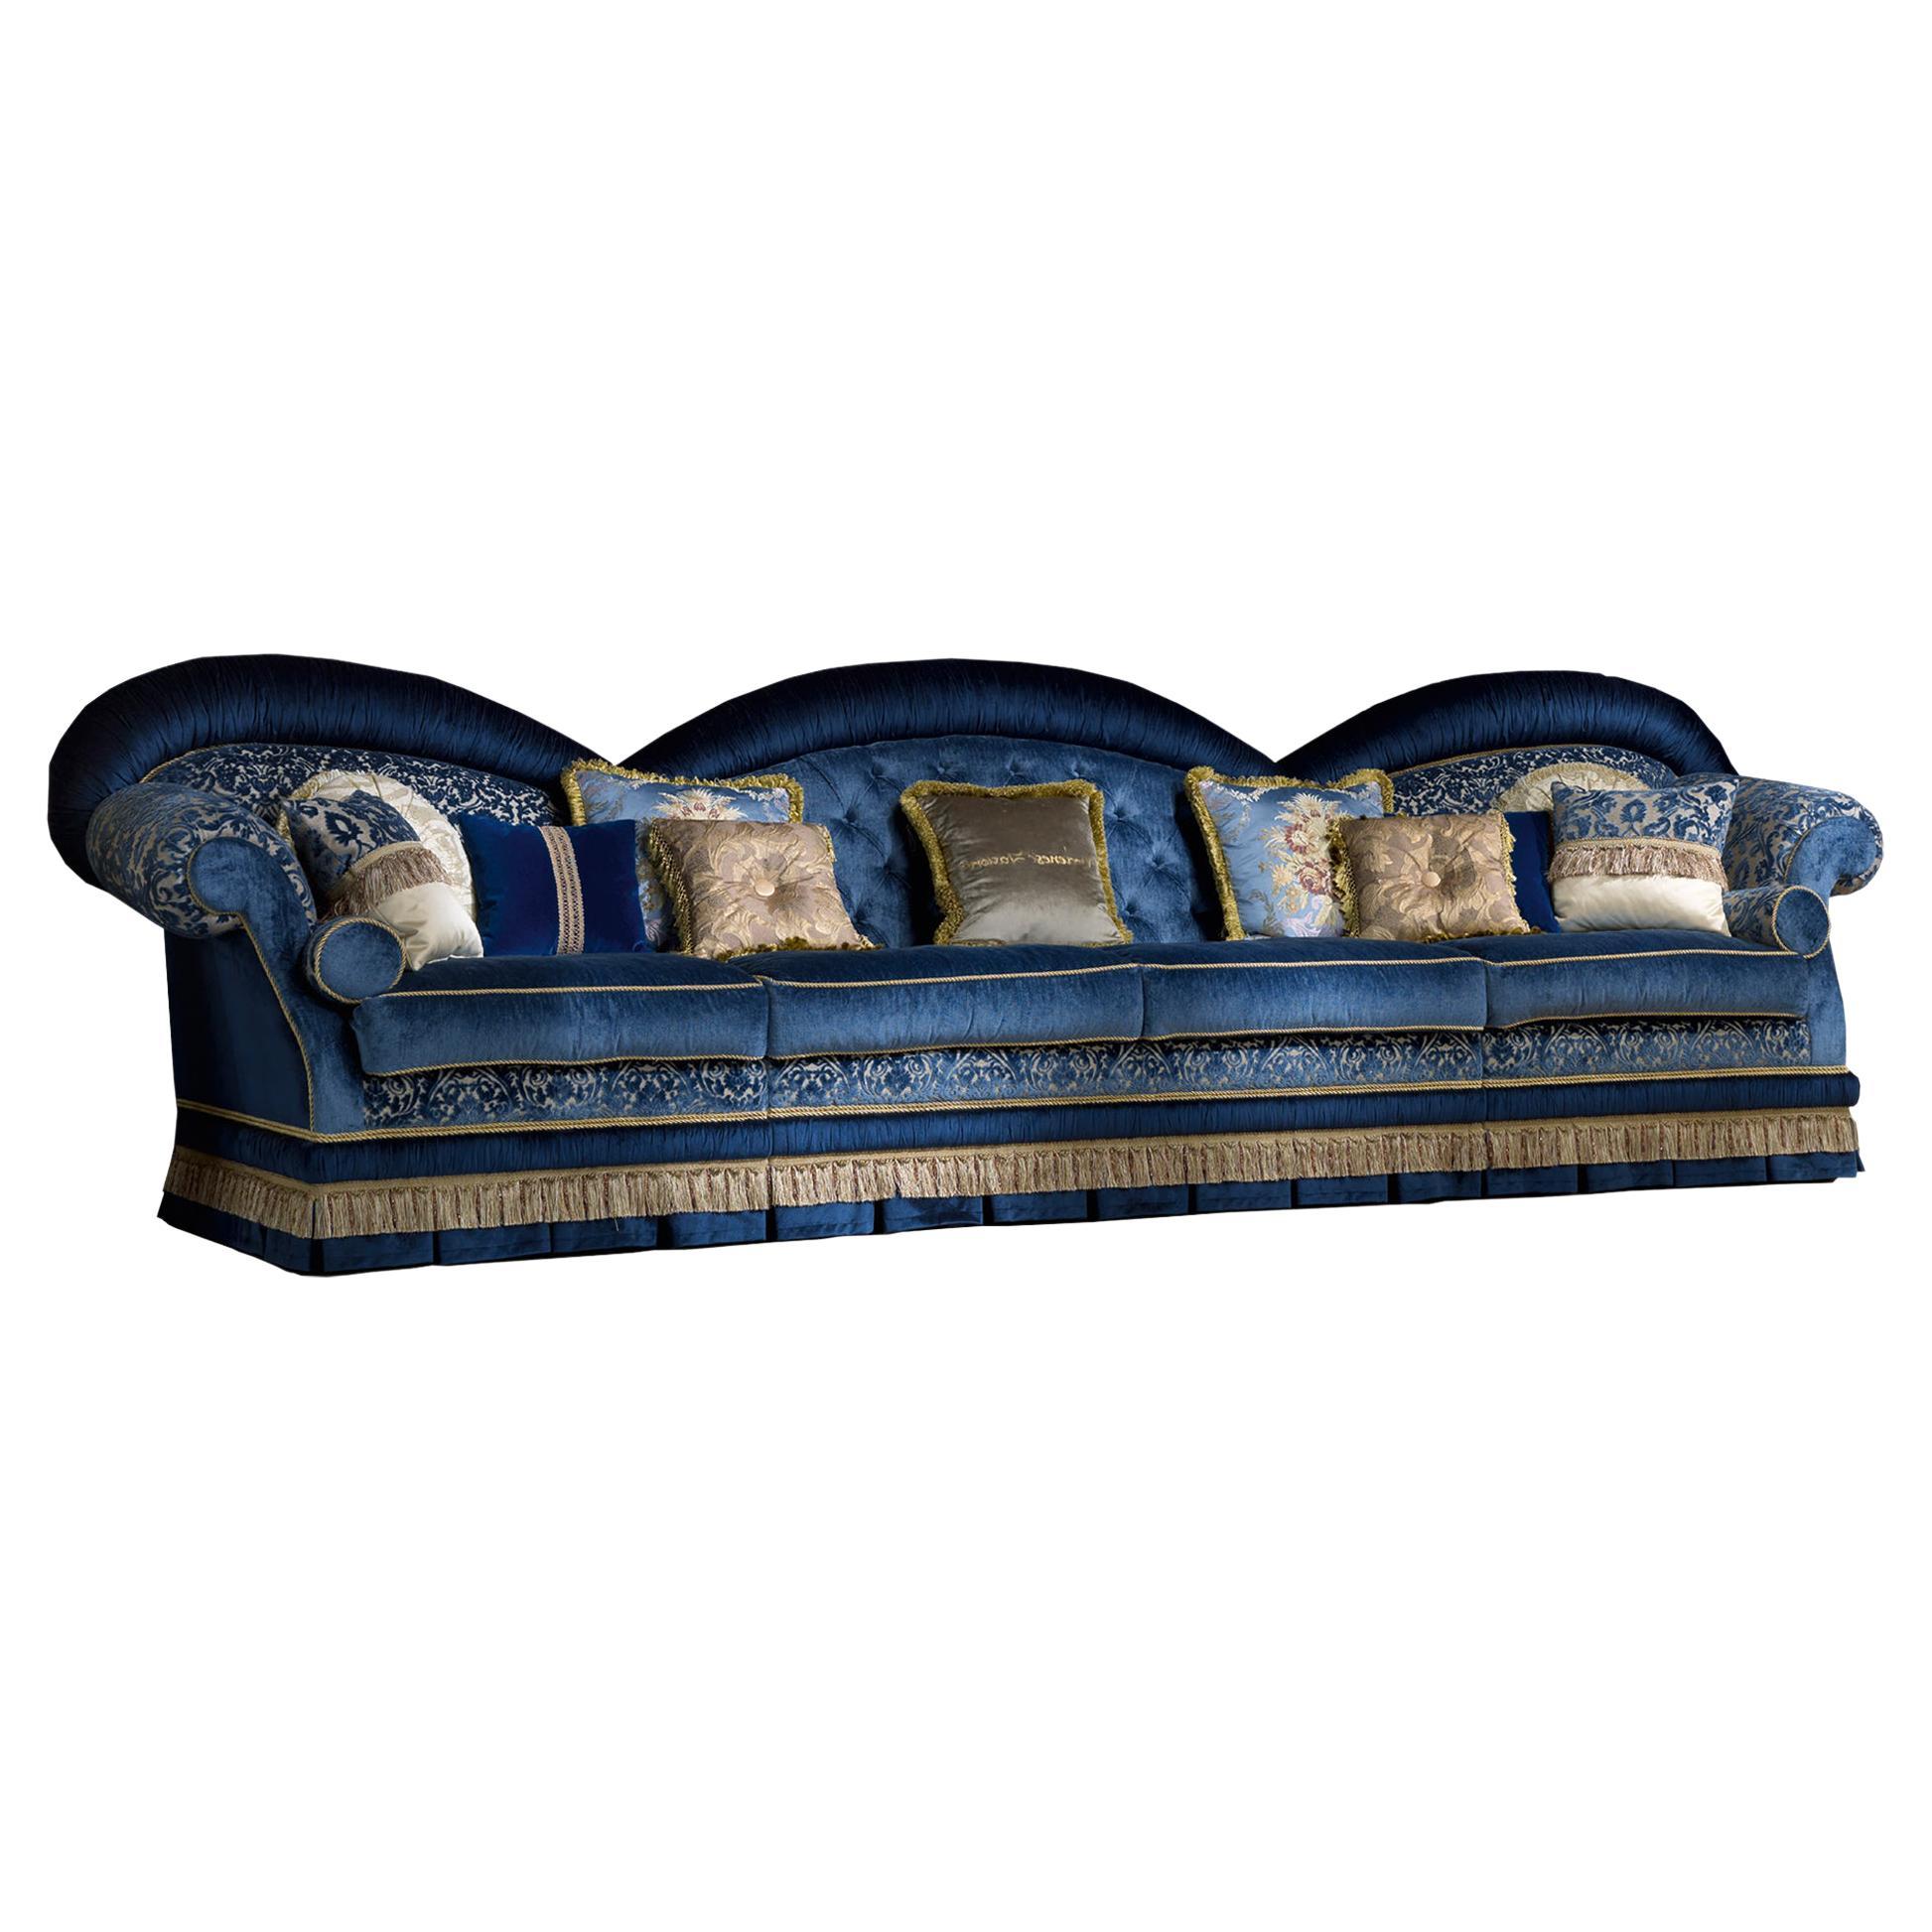 Royal Blue Sofa in Exclusive Massive Wood and Blue Velvet Capitonné Upholstery For Sale